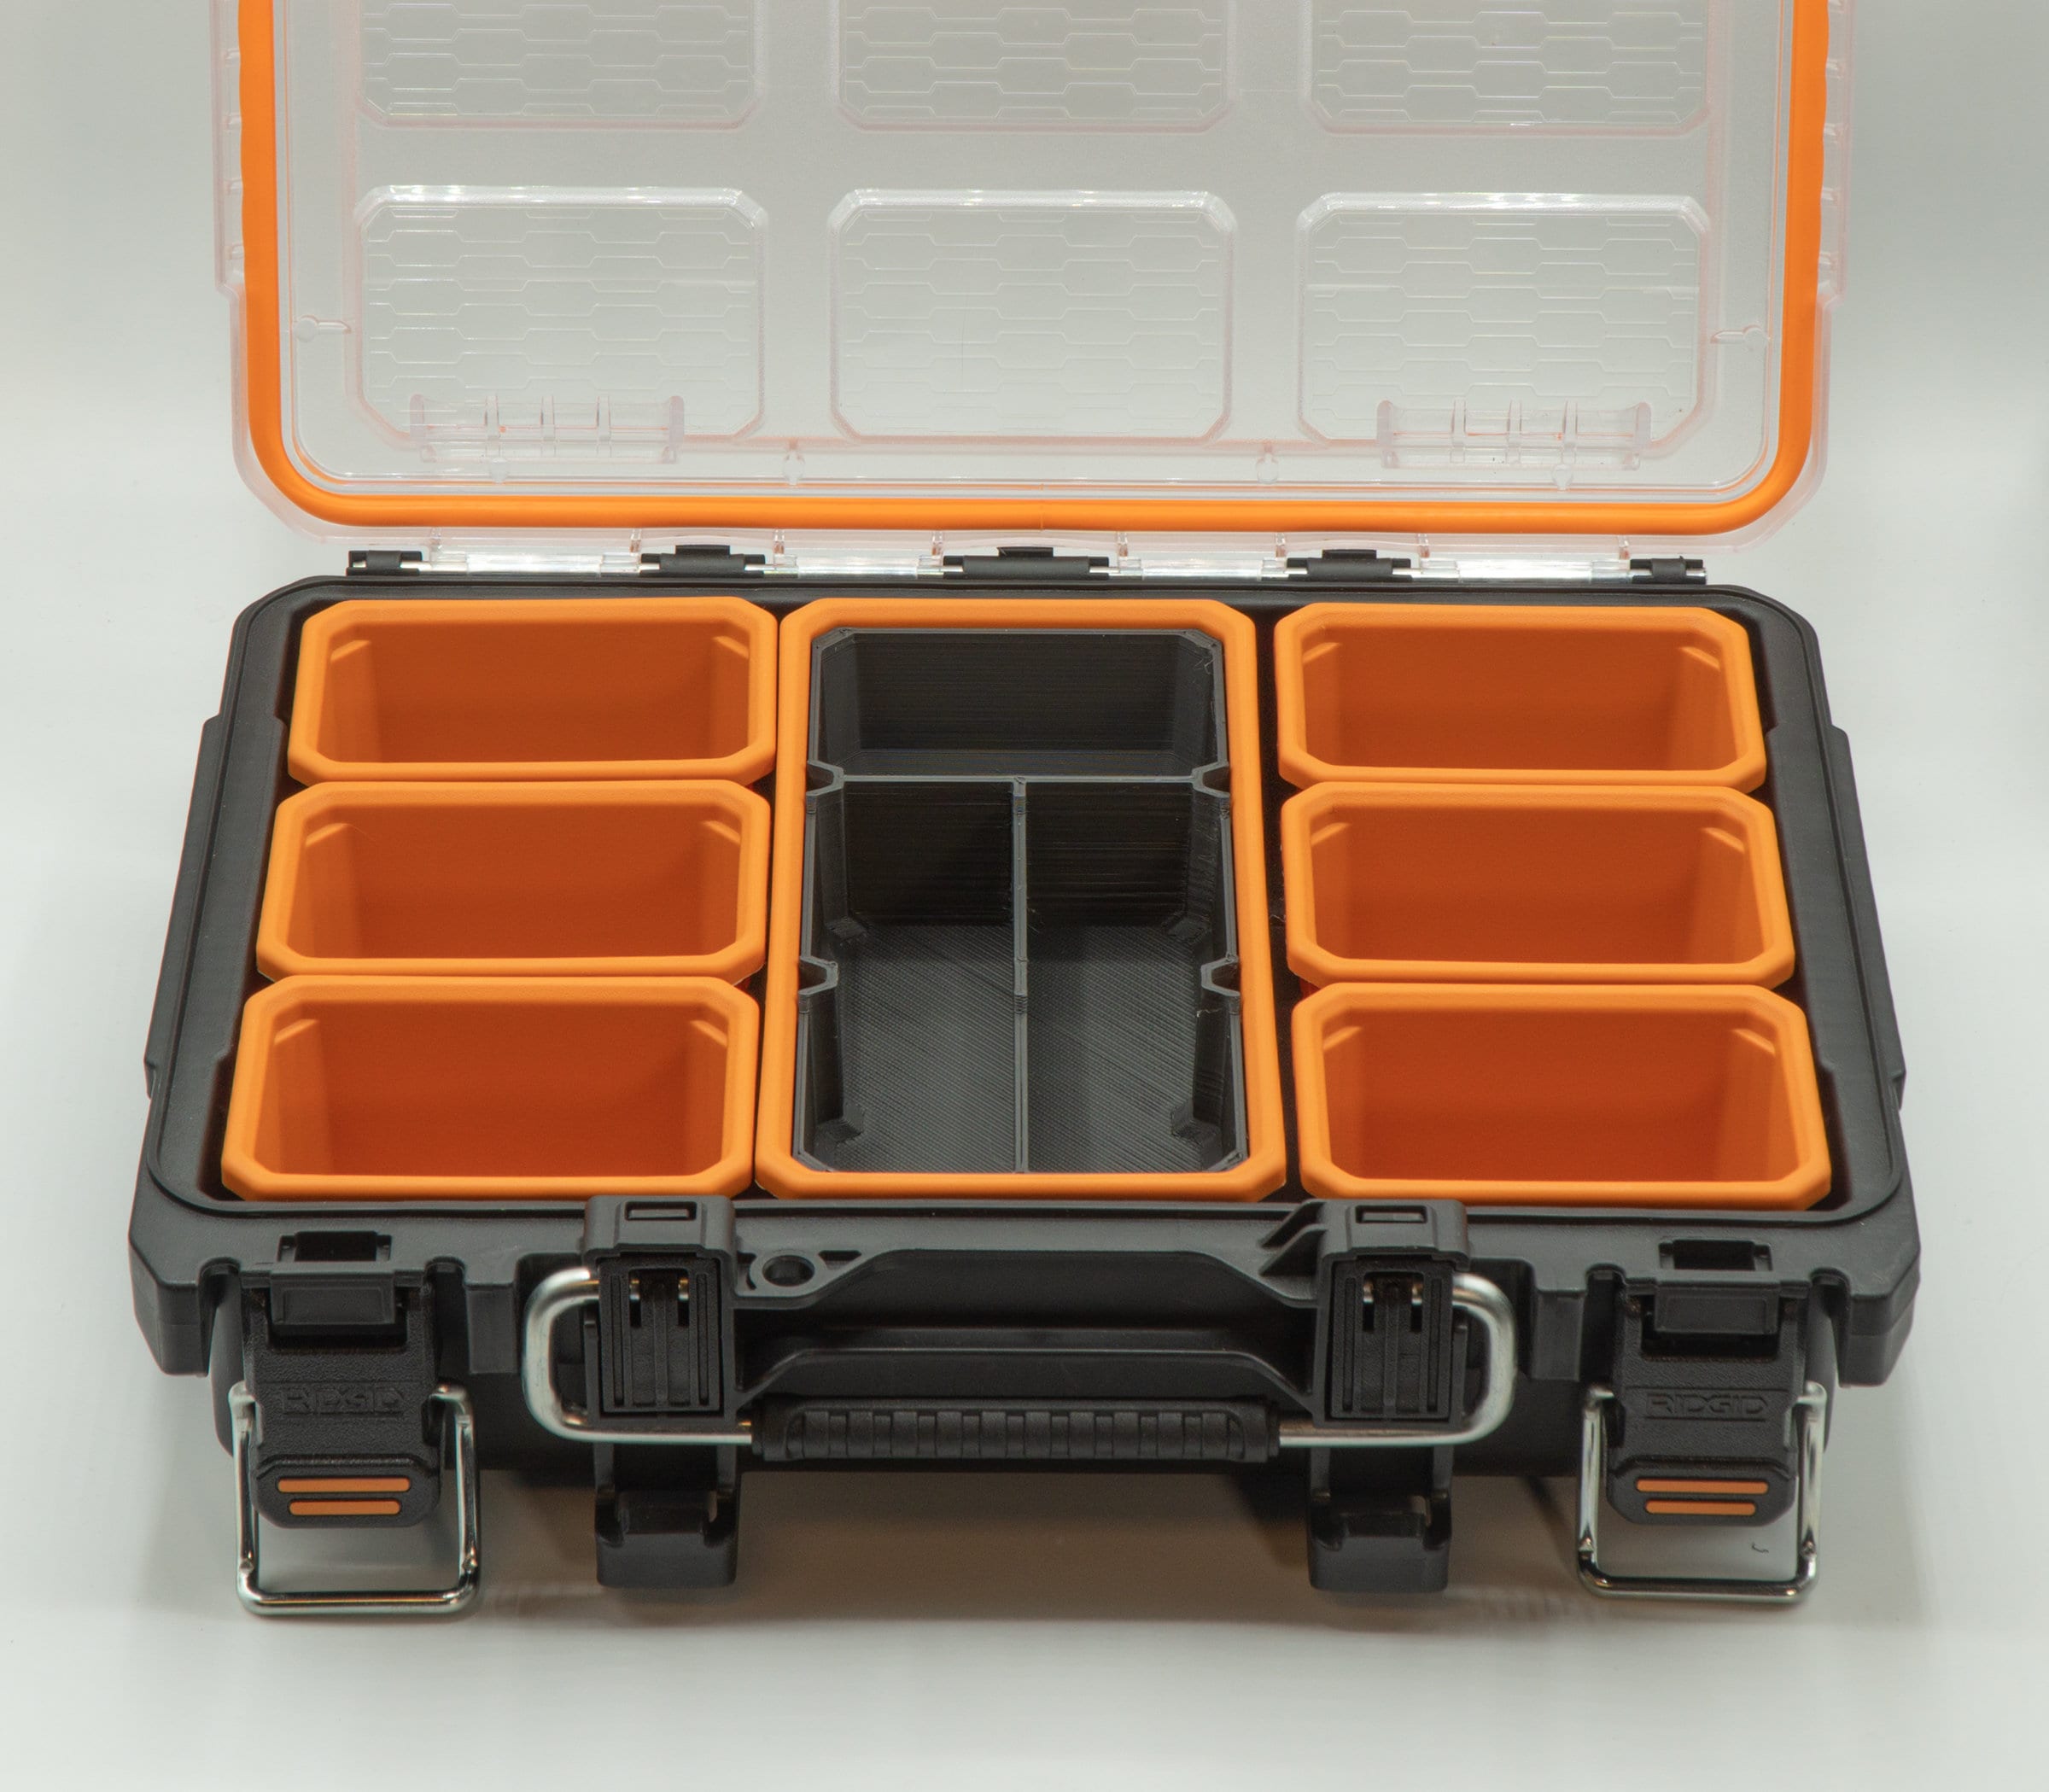 Ridgid Small Parts Organizer Compact Pro Gear System 13 6 Compartment Tool  Case